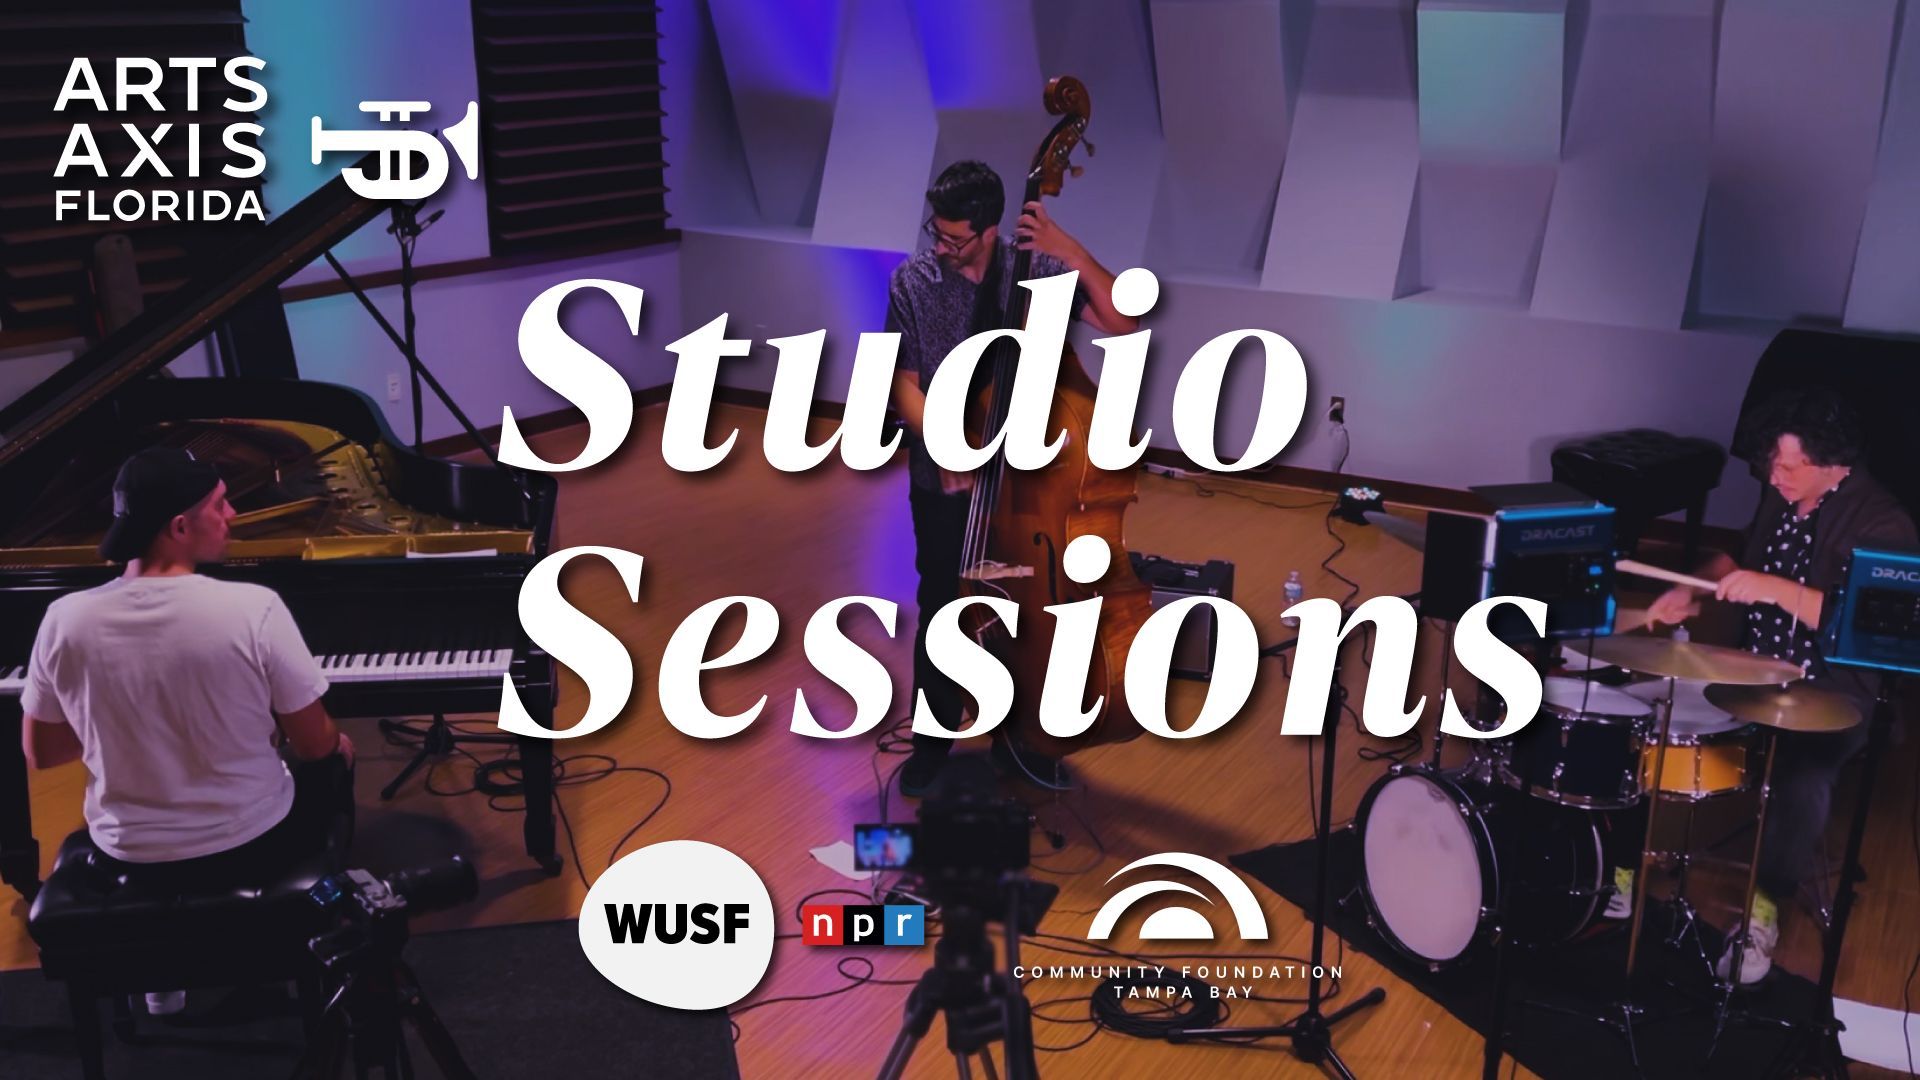 a poster for studio sessions at arts axis florida